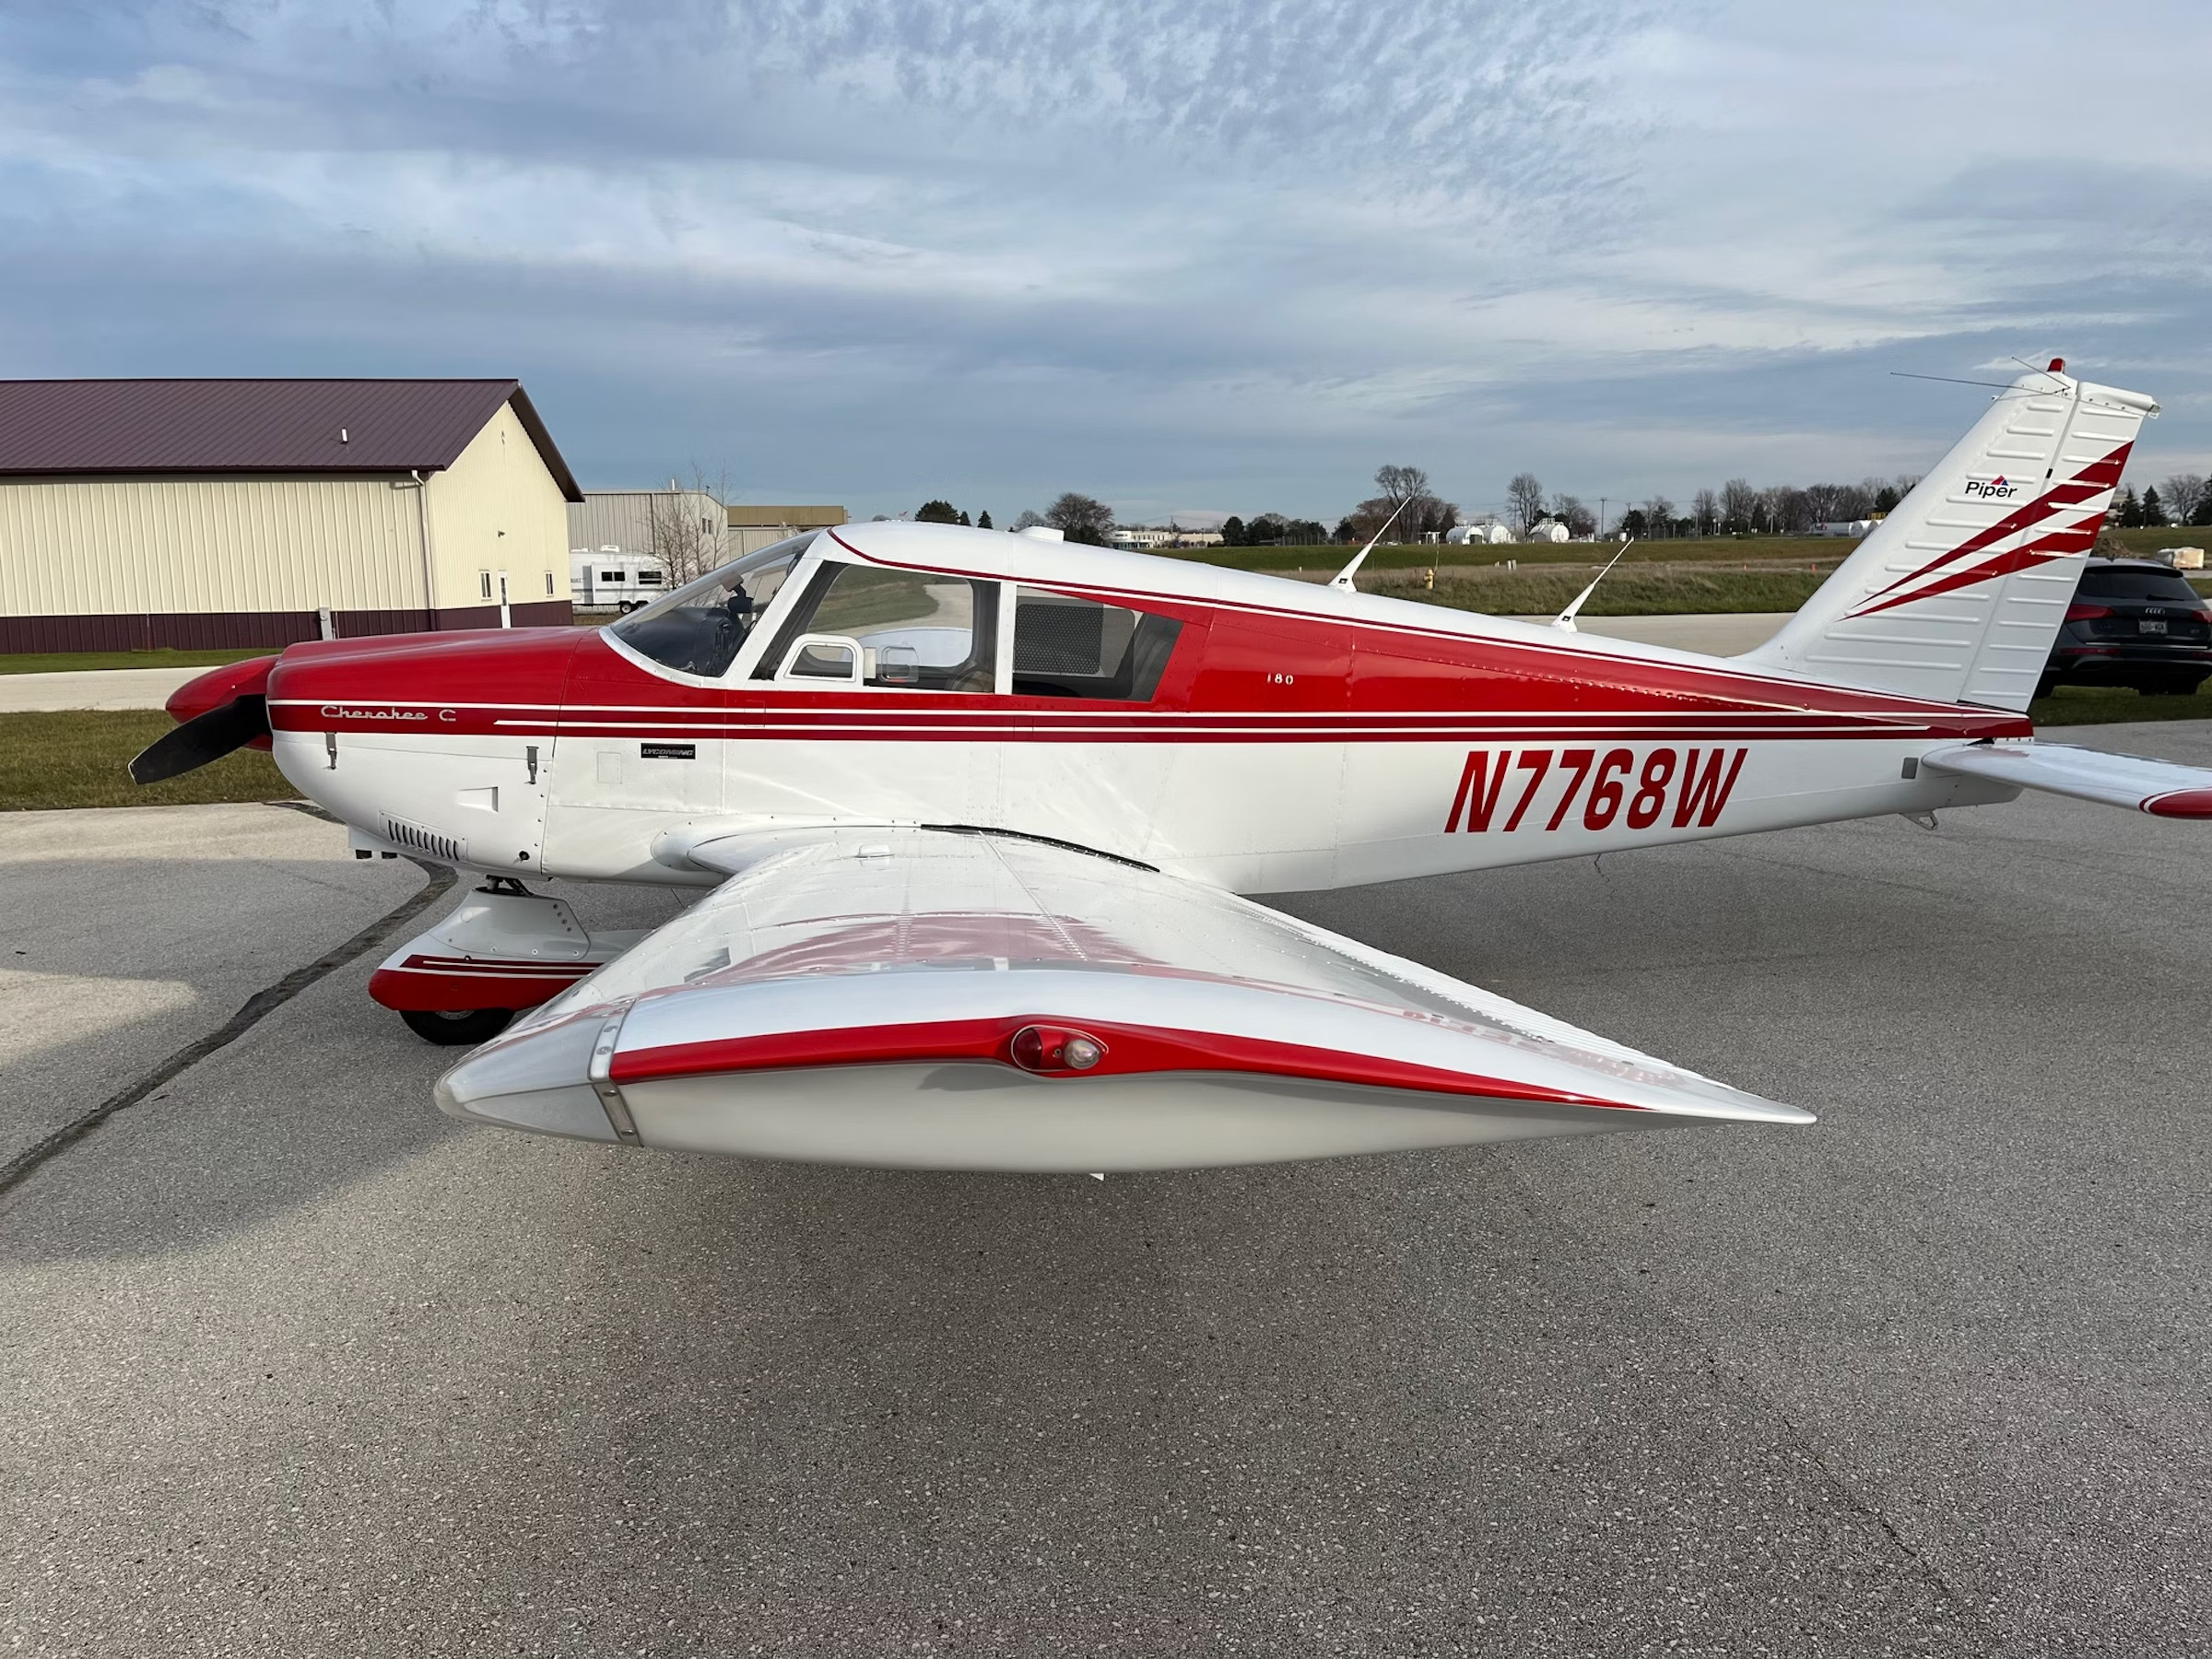 This 1965 Piper PA-28-180 Is an Economical, All-Around ‘AircraftForSale’ Top Pick